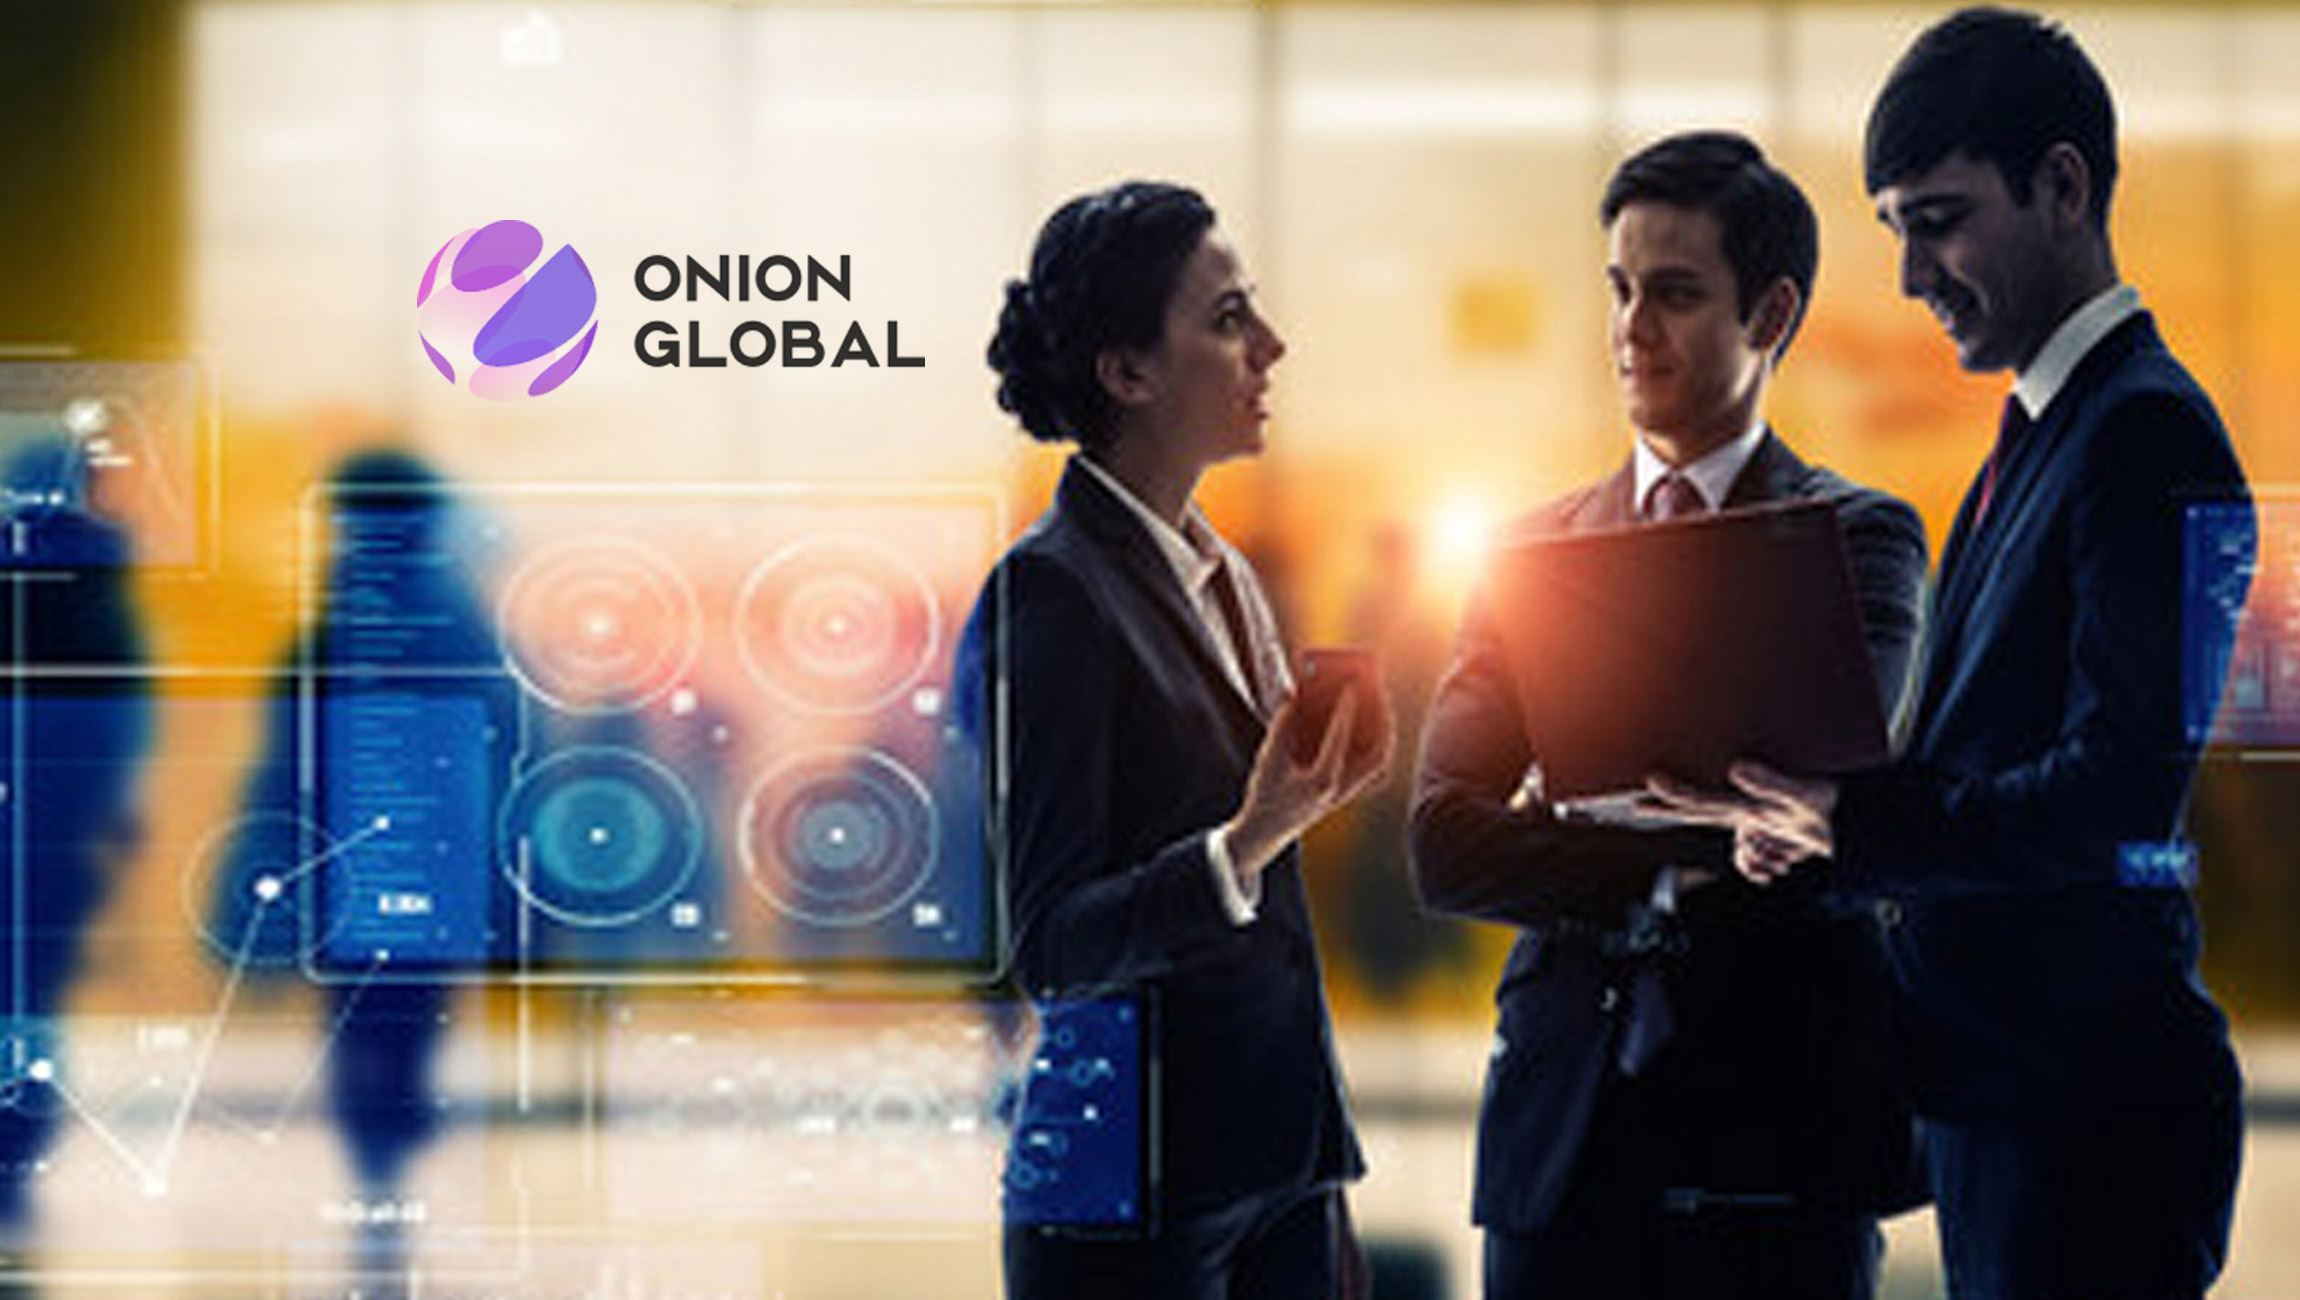 Onion Global Committed to Meeting Growing Needs of Women Consumers through New Business Platform